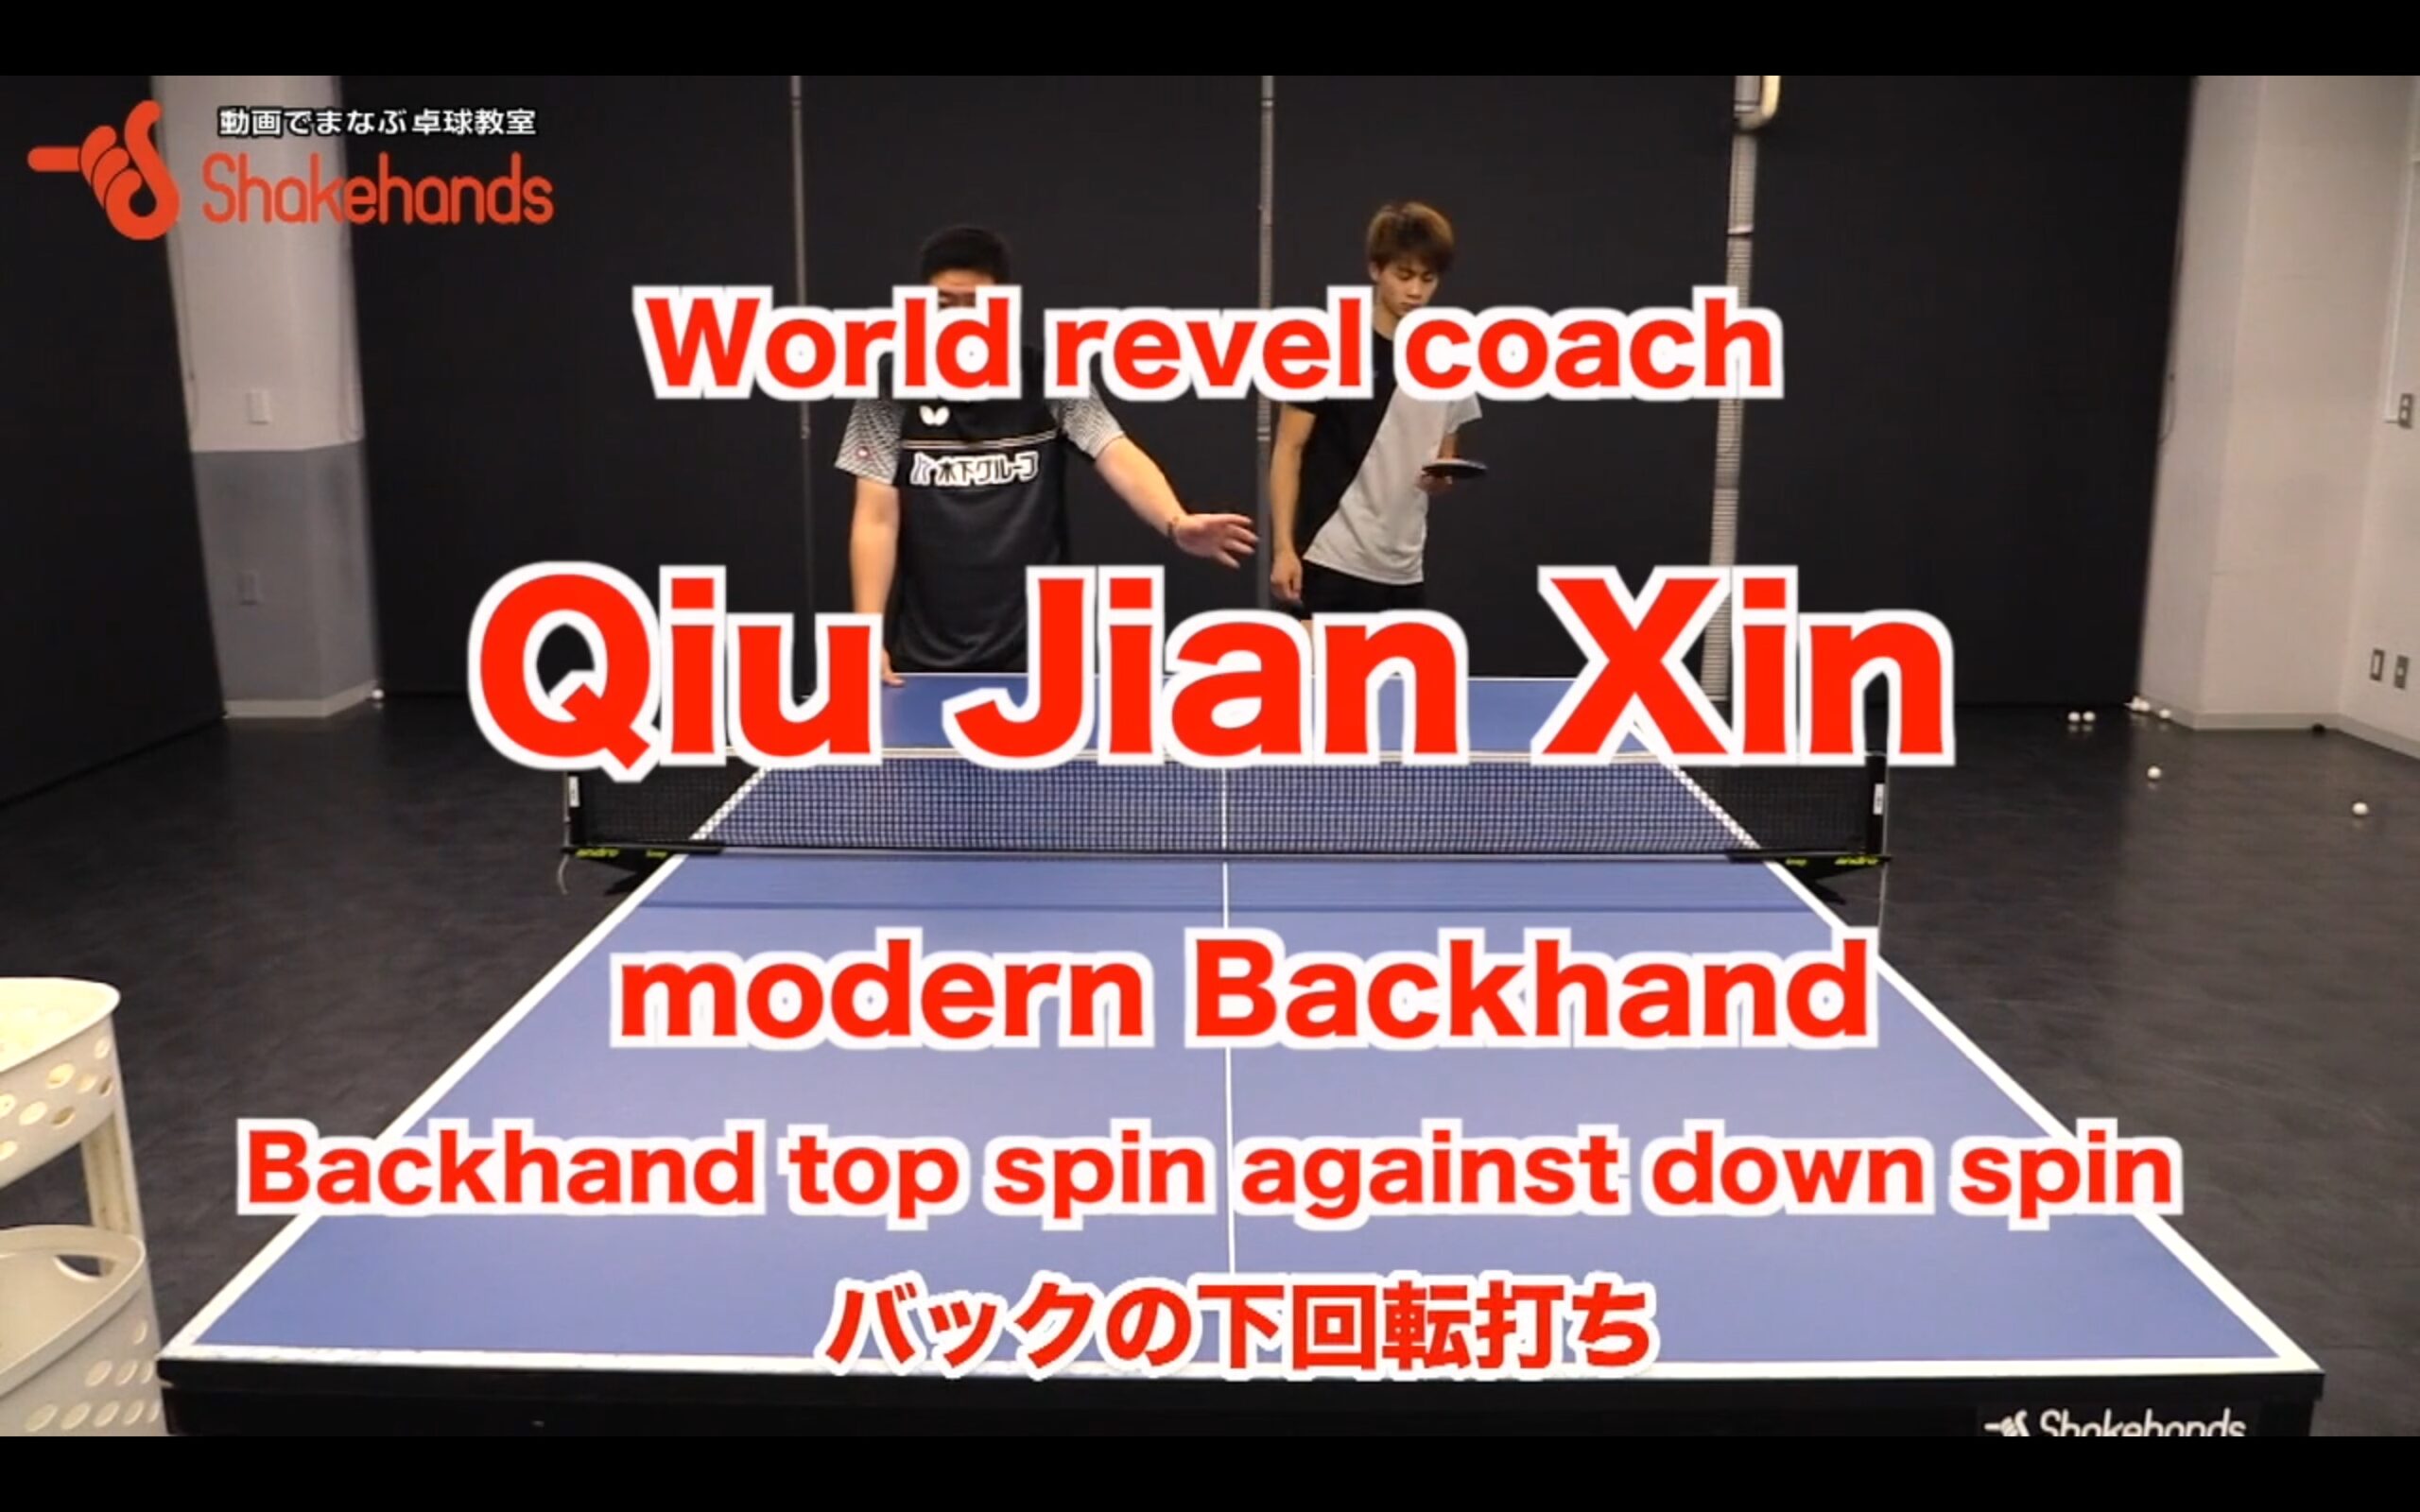 Back hand top spin against down spin